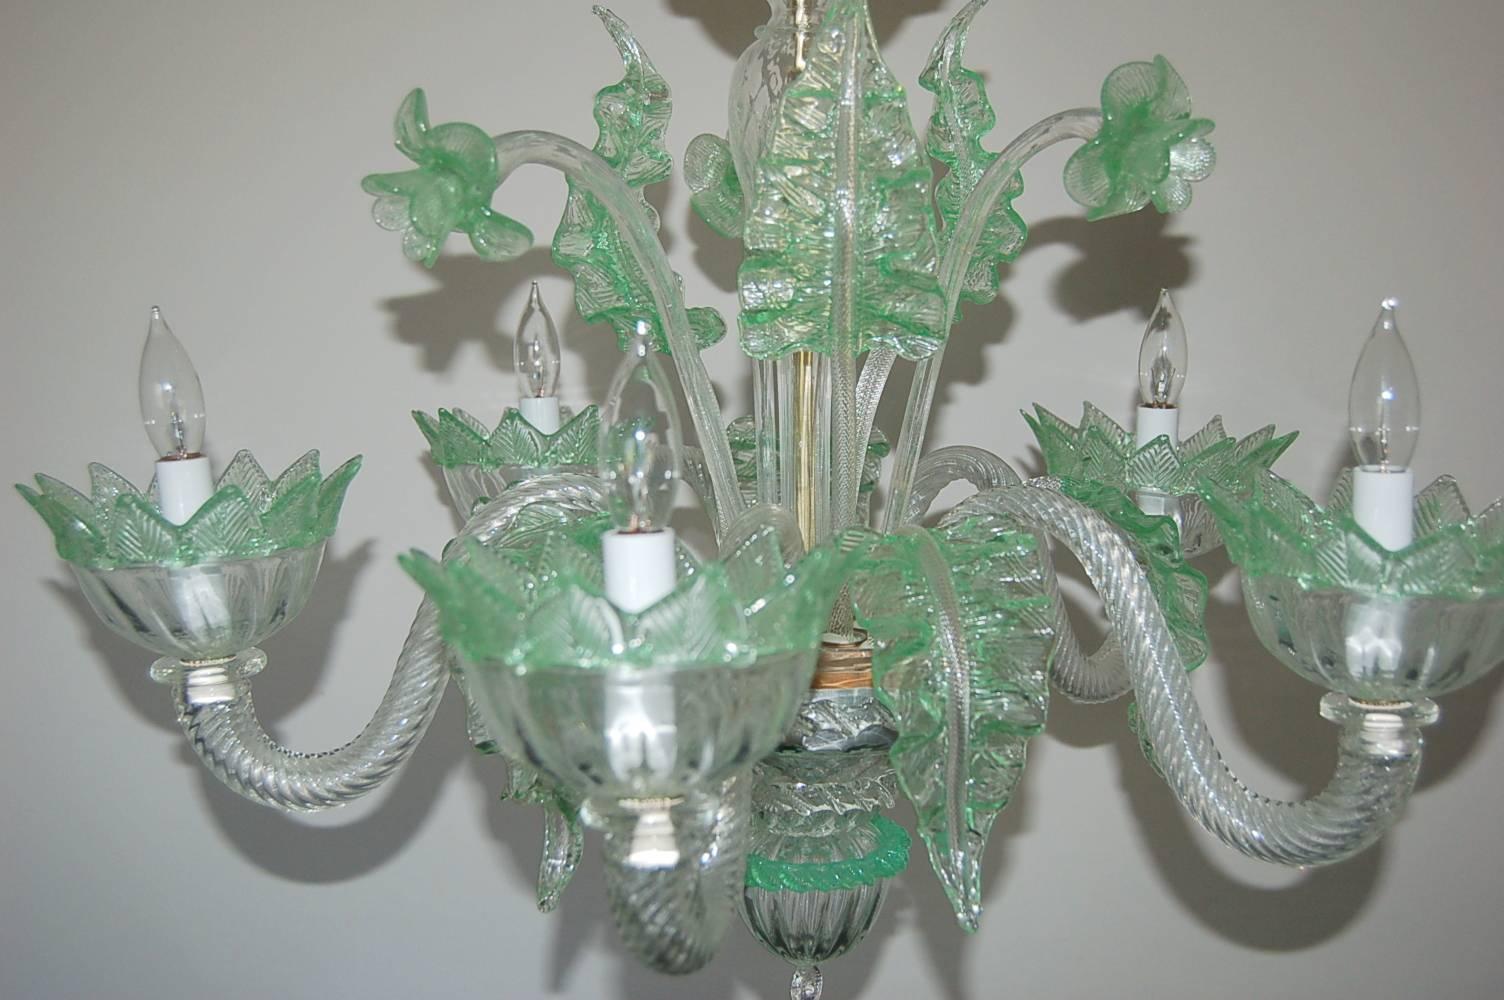 Very chic vintage five-light Murano glass chandelier, circa 1950s, made of Murano Crystal with green glass accents. Newly rewired and rebuilt. 

The chandelier is 25 inches in width, and 26 inches in height, from glass to glass.